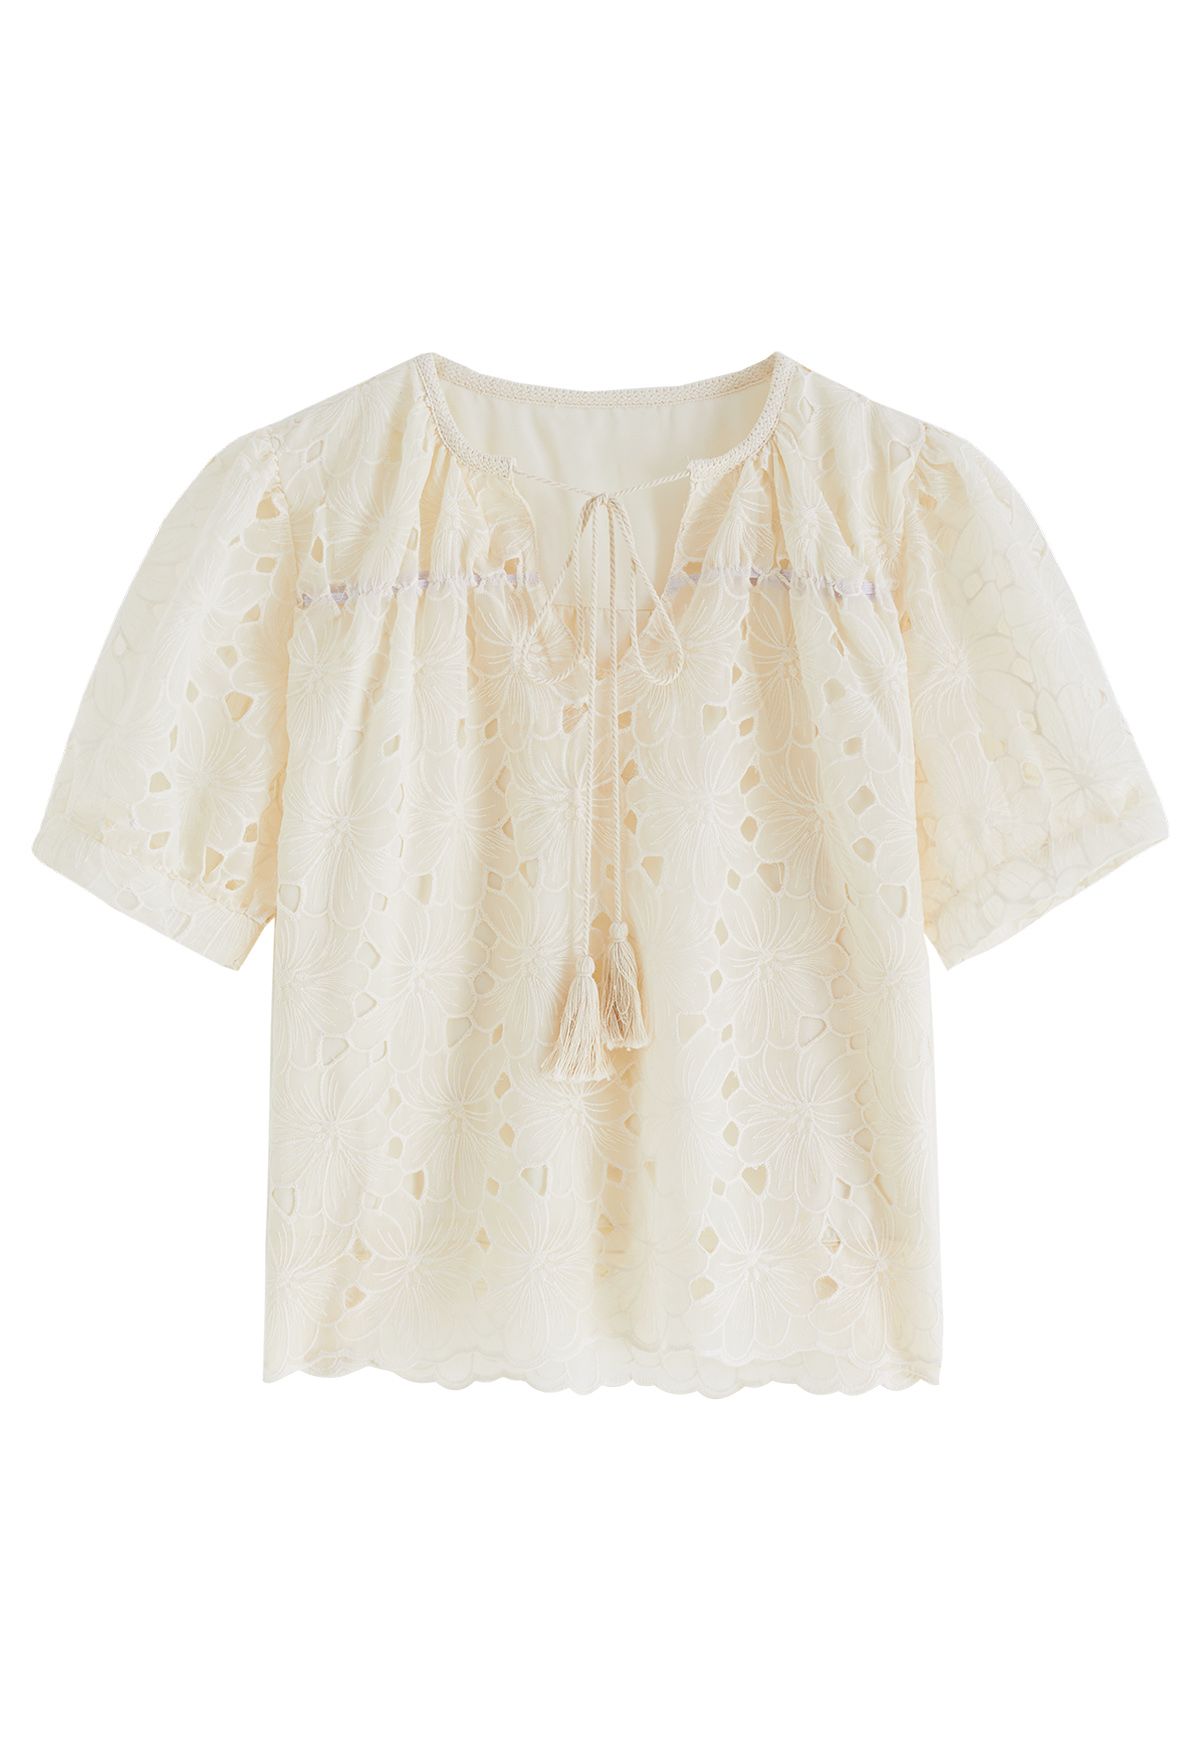 Daisy Embroidery Tassel Dolly Top in Light Yellow